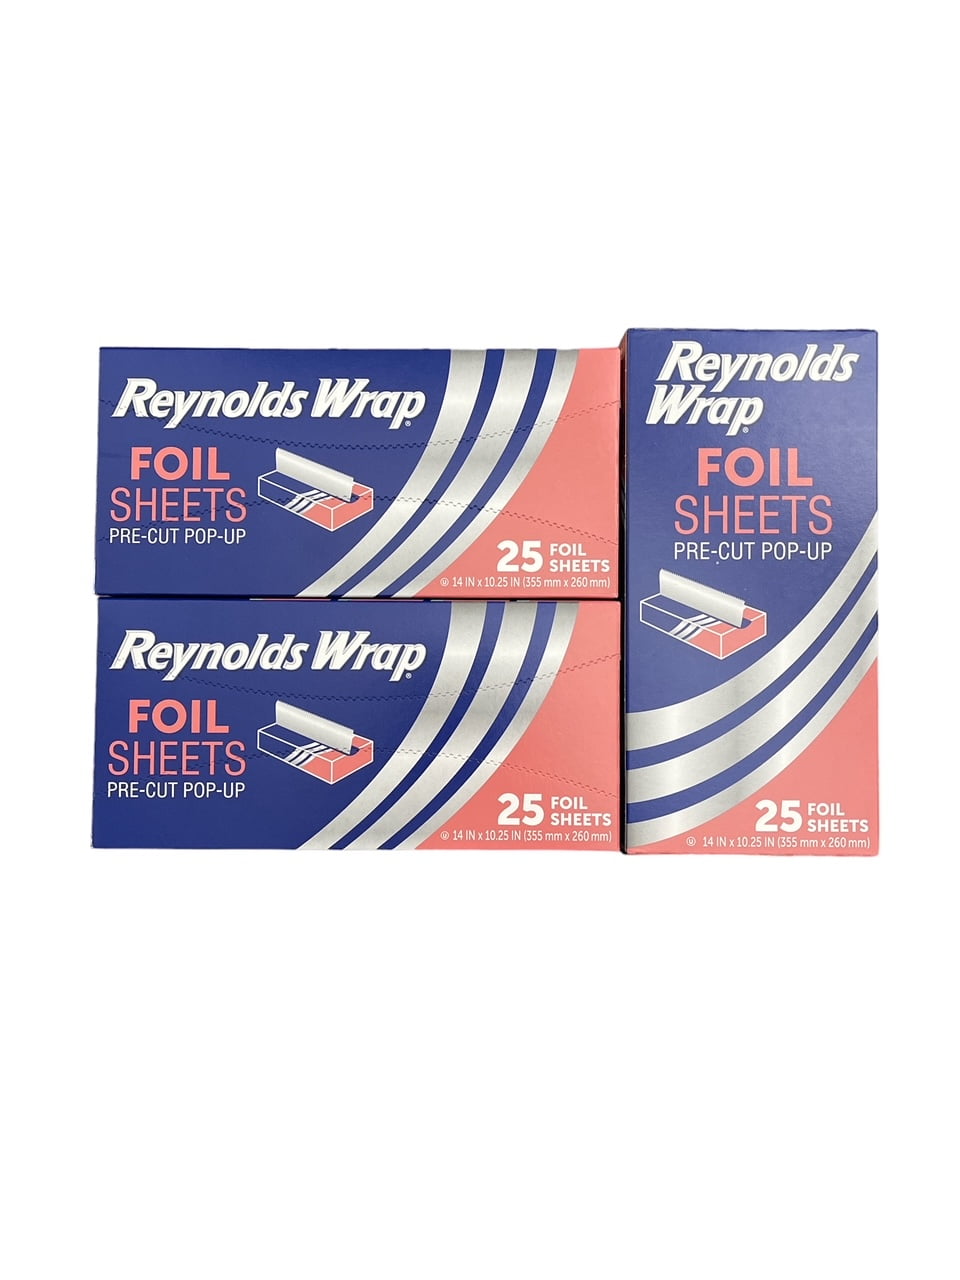 Reynolds Kitchens Foil Sheets, Pre-Cut Pop Up, 14 In x 10.25 In - 50 sheets